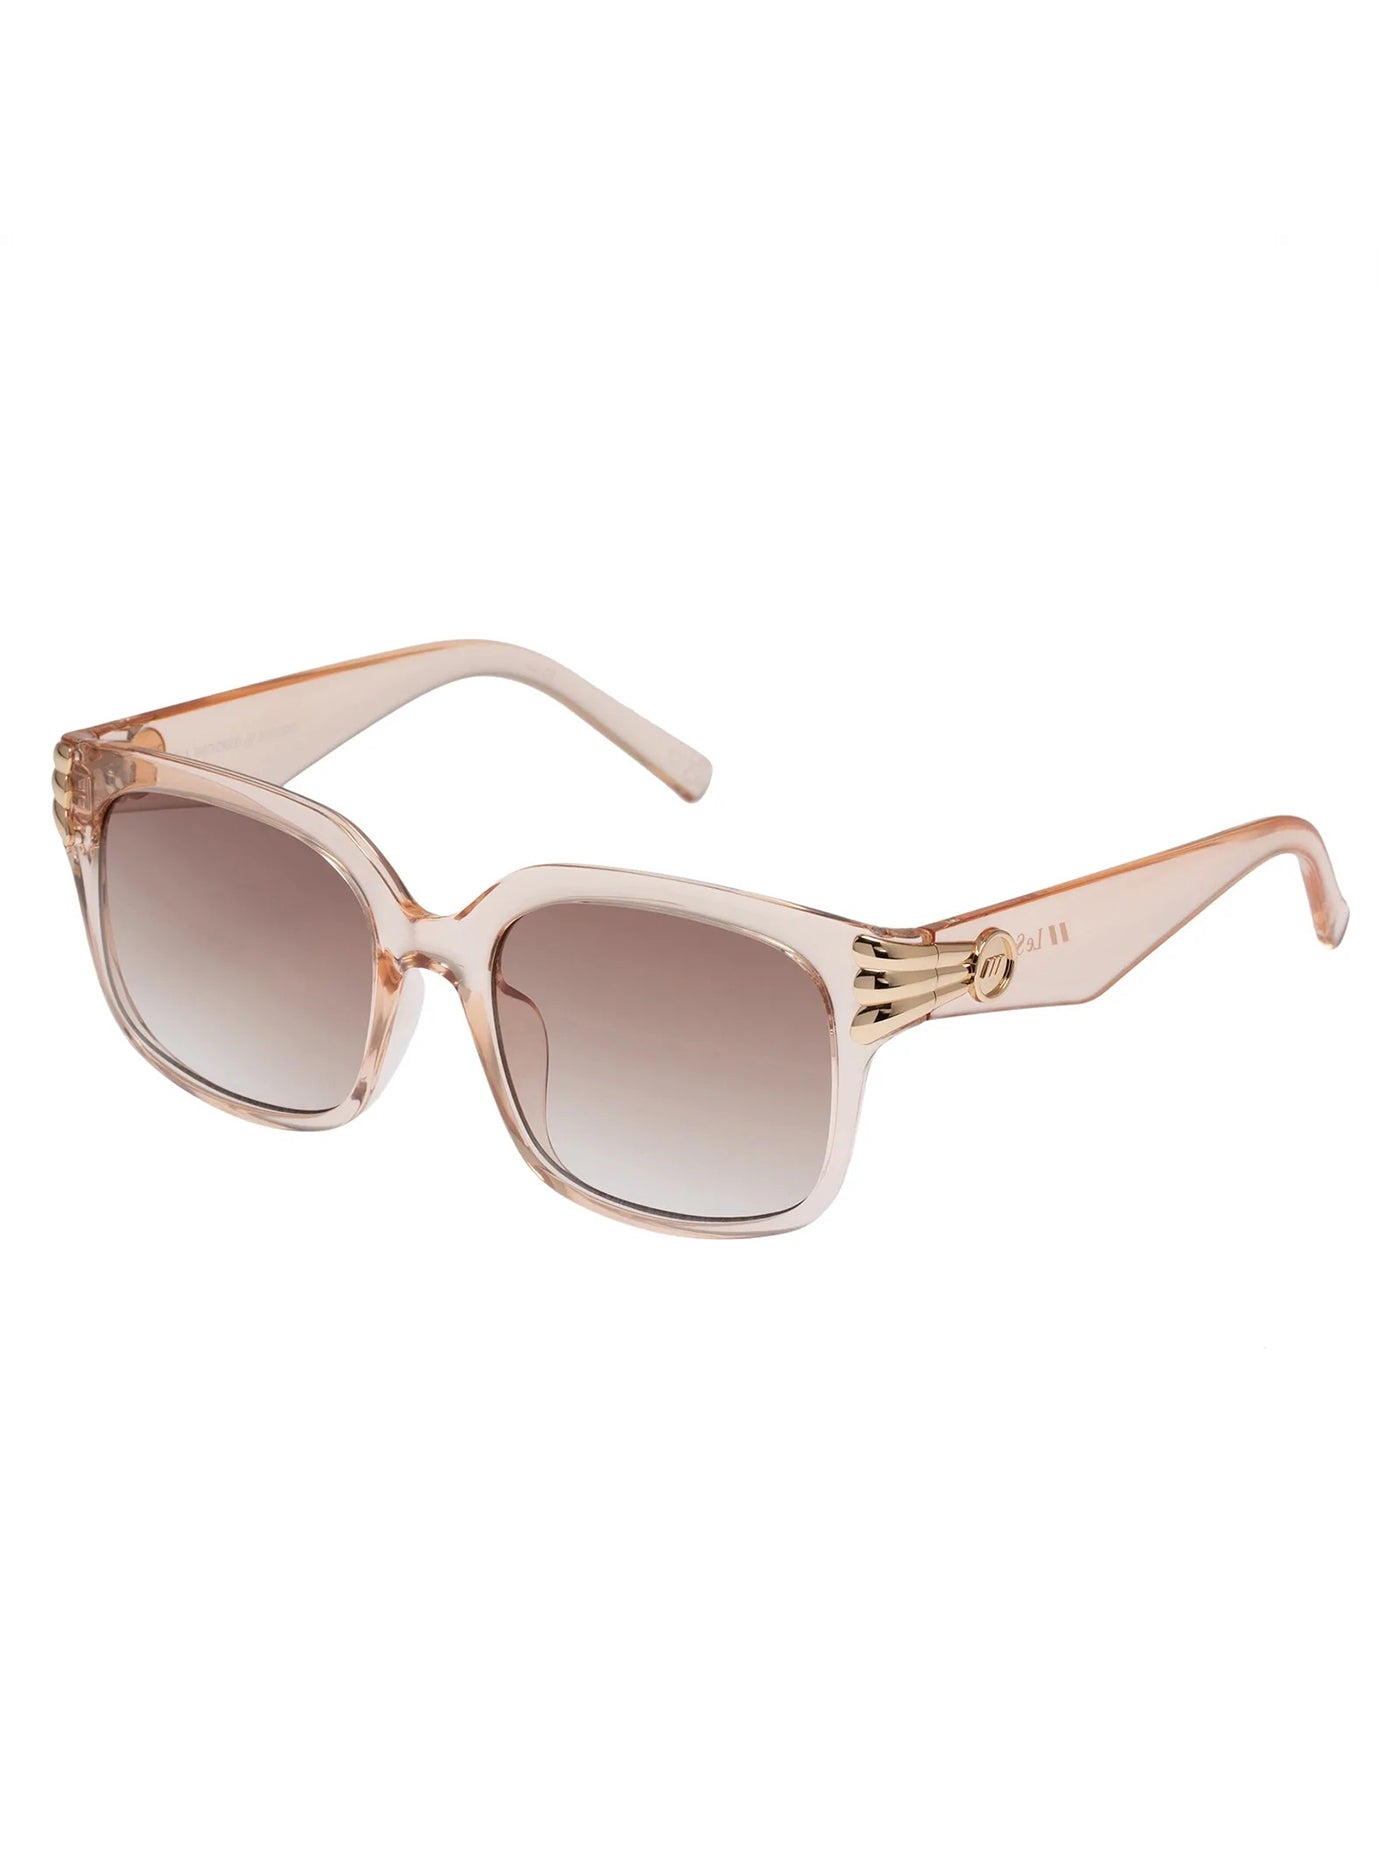 Le Specs Shell Shocked Pink Champagne Sunglasses